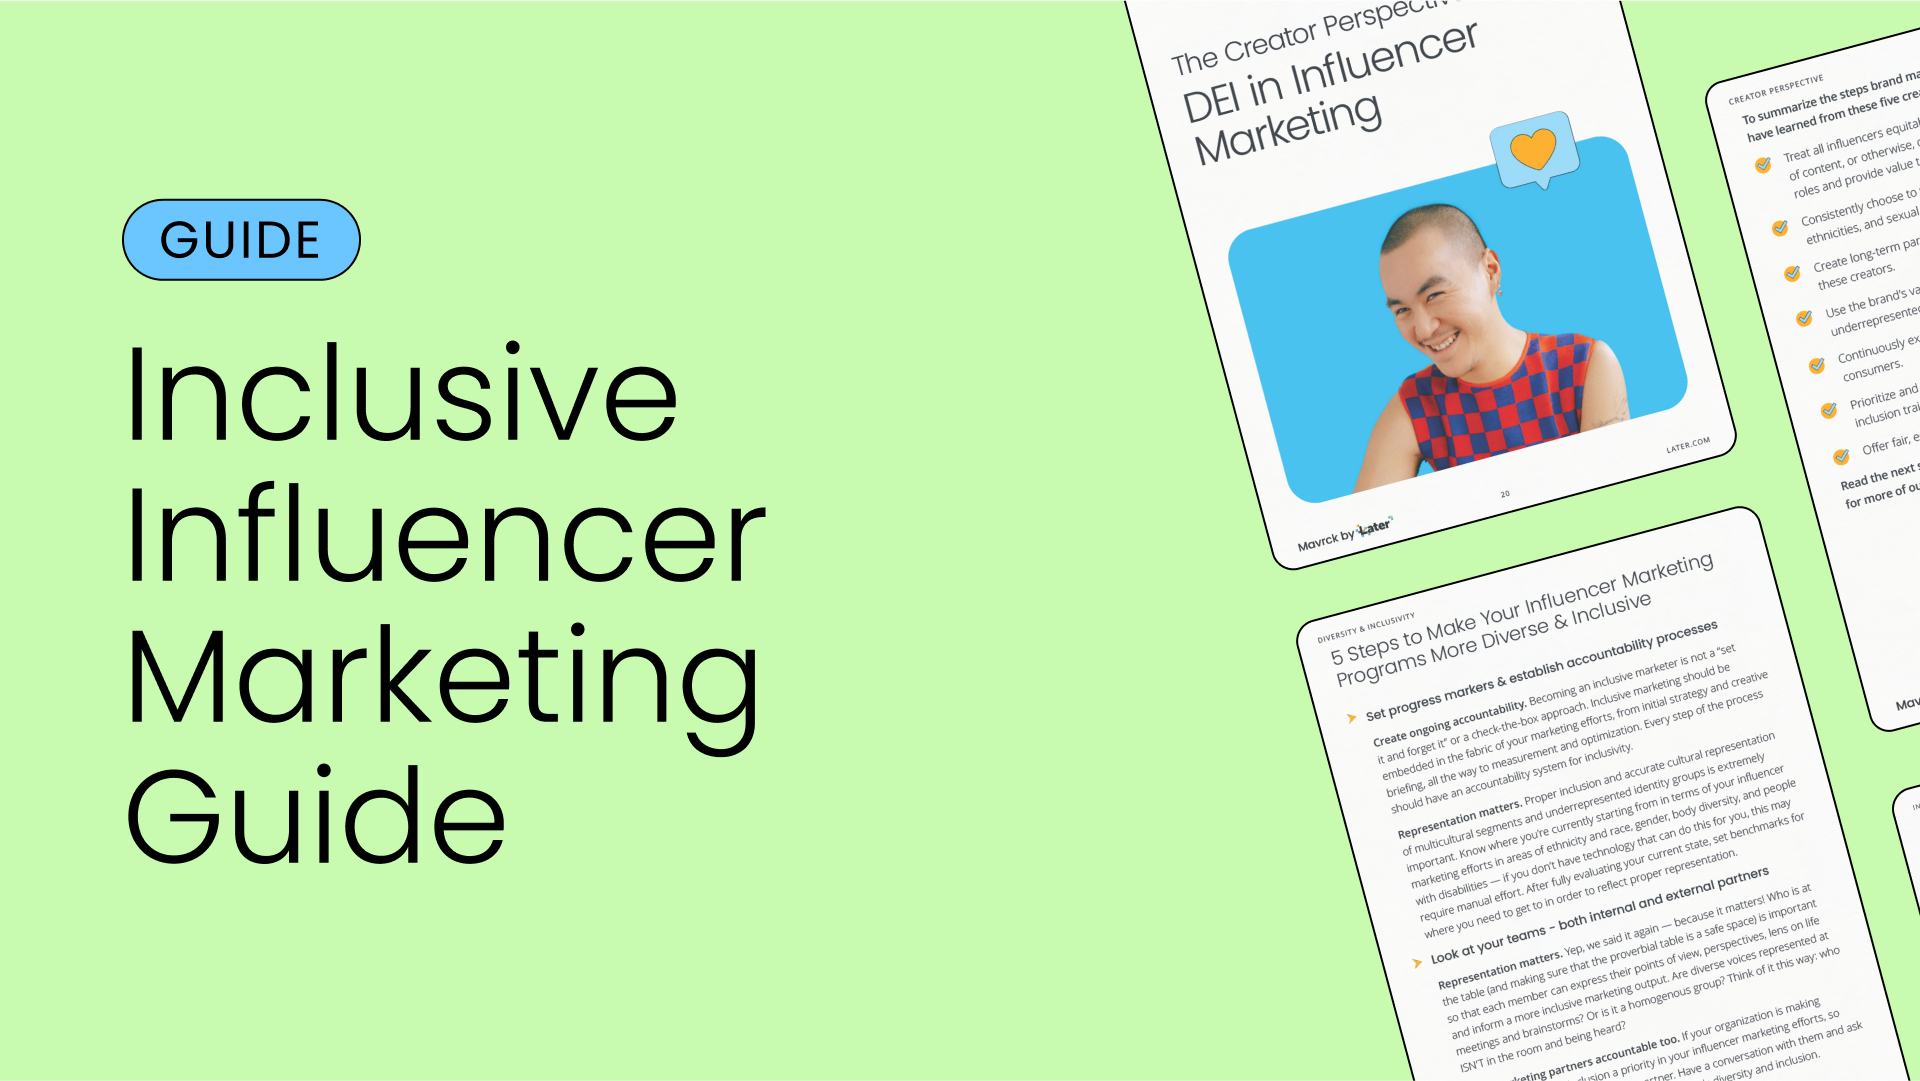 Guide to DEI in Influencer Marketing thumbnail